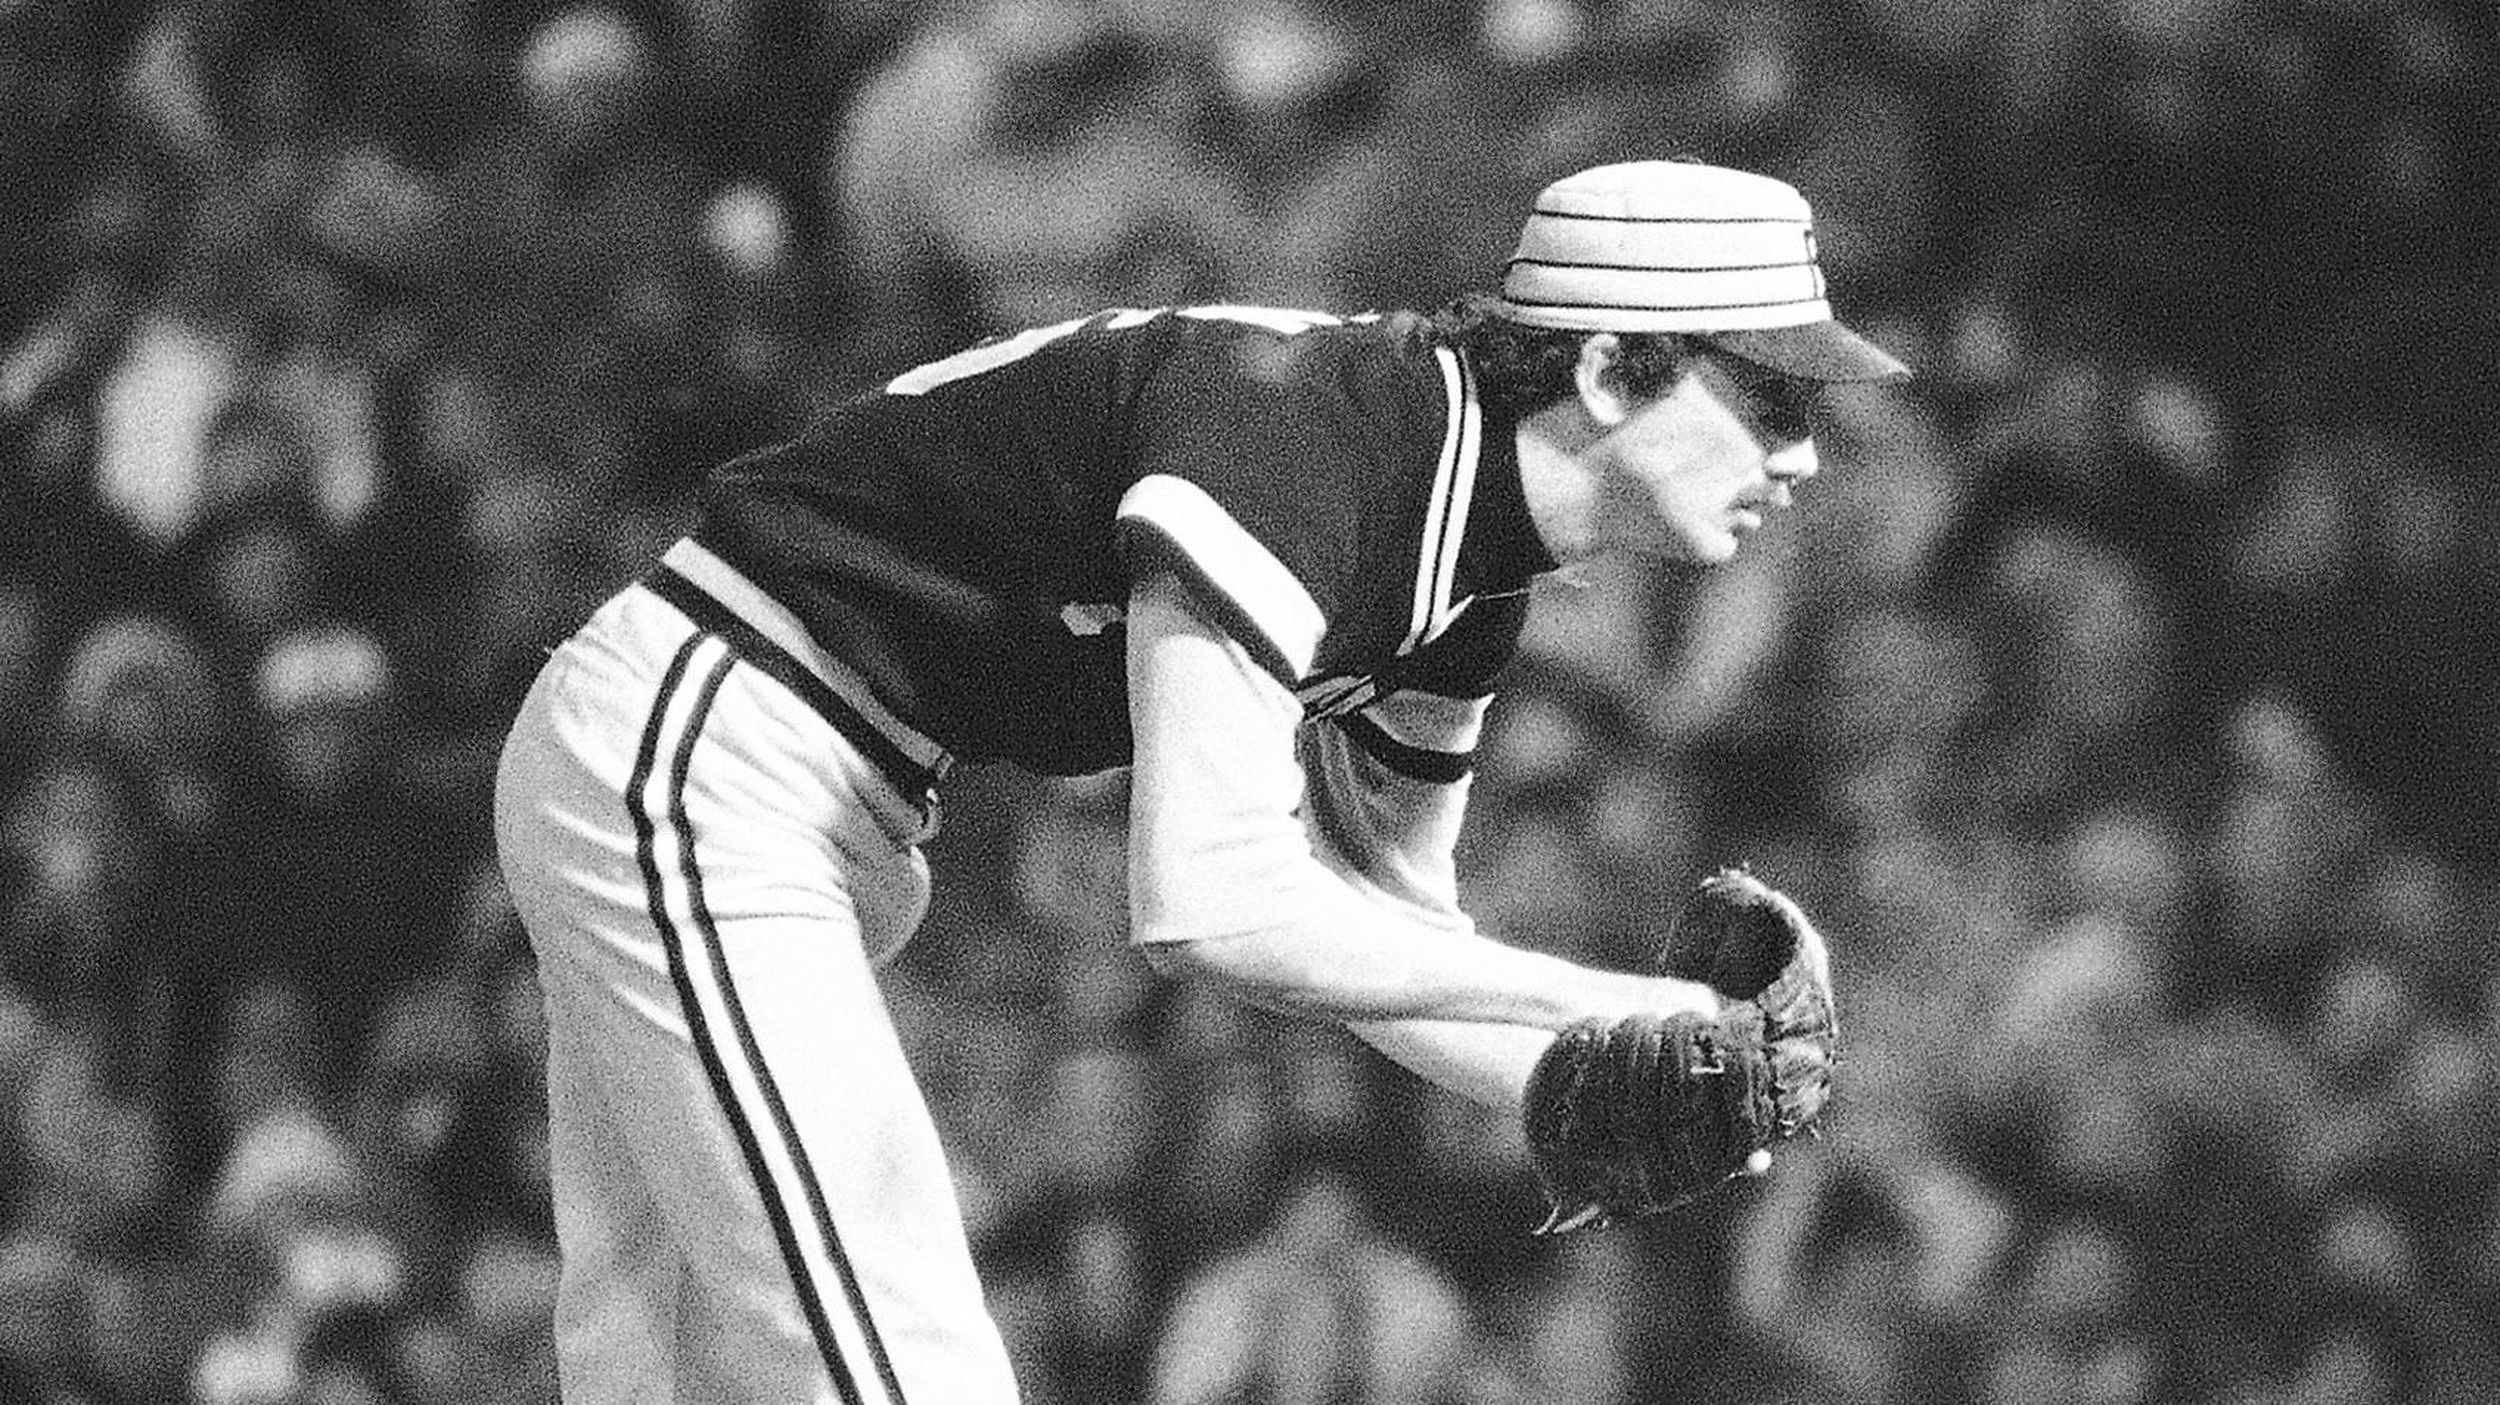 Bruce Kison, won 2 World Series with Pirates, dead at 68